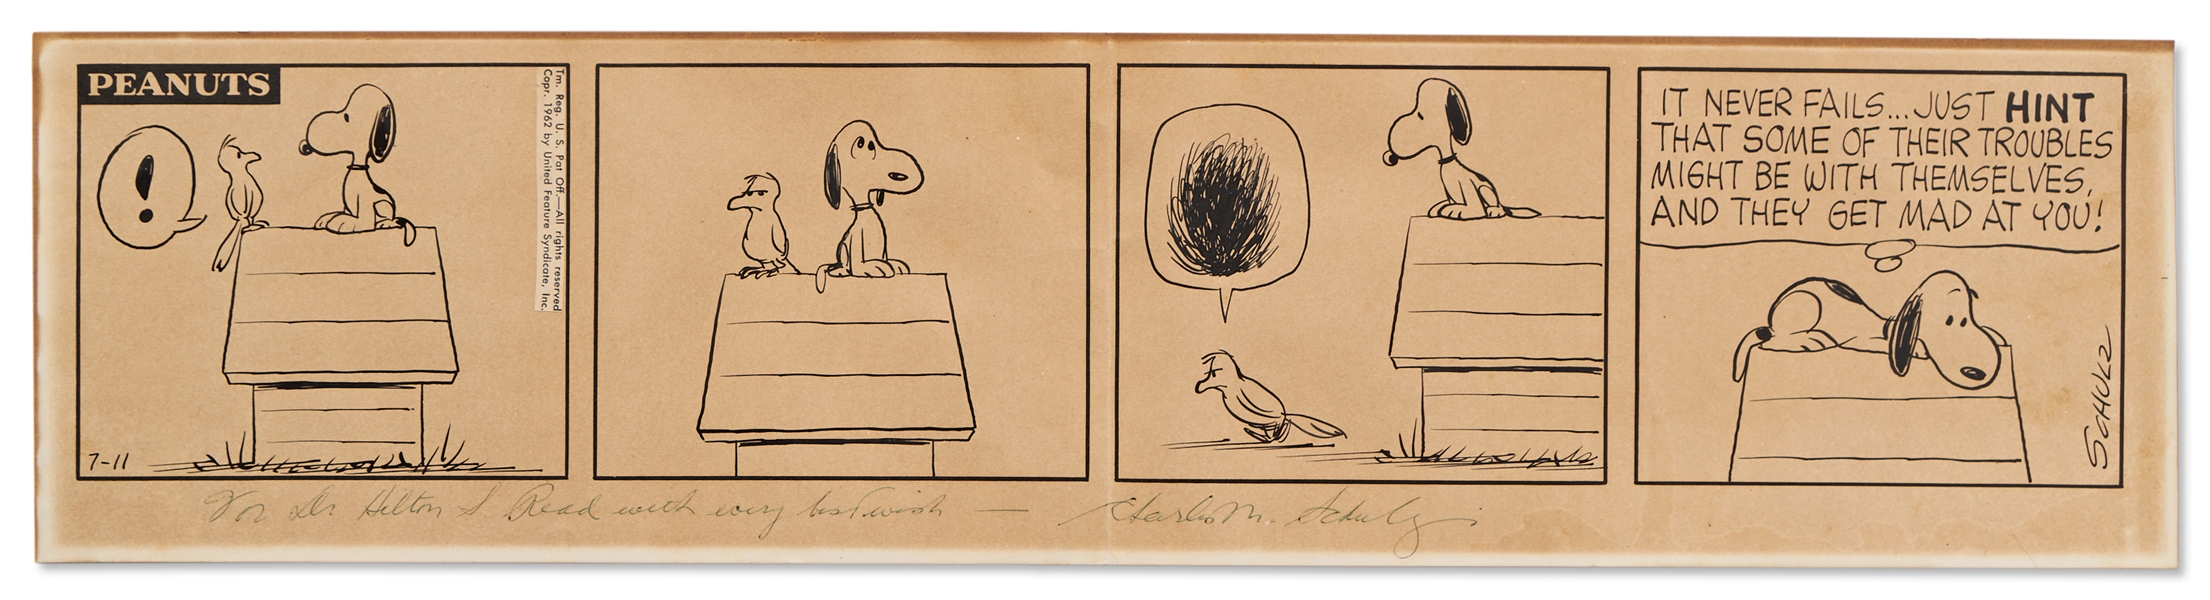 Original Charles Schulz Hand-Drawn ''Peanuts'' Comic Strip from 1962 -- Snoopy Befriends a Bird Who's Perched on His Doghouse